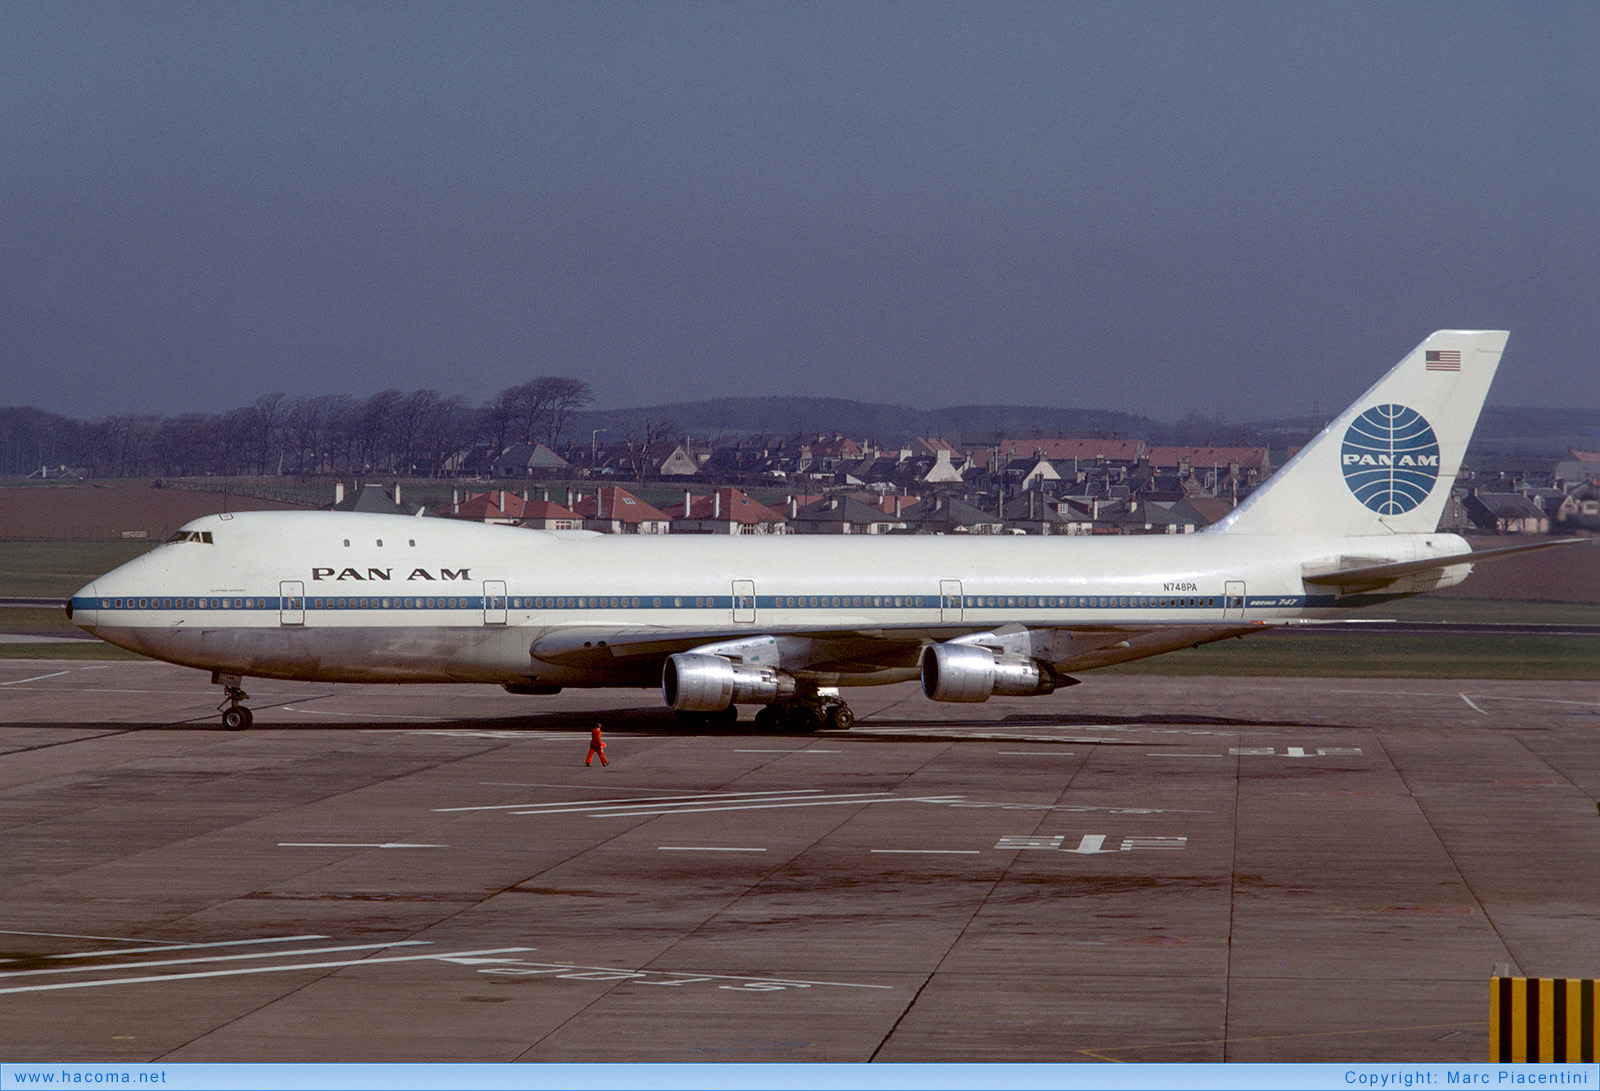 Photo of N748PA - Pan Am Clipper Hornet / Crest of the Wave - Glasgow Prestwick Airport - Apr 7, 1974